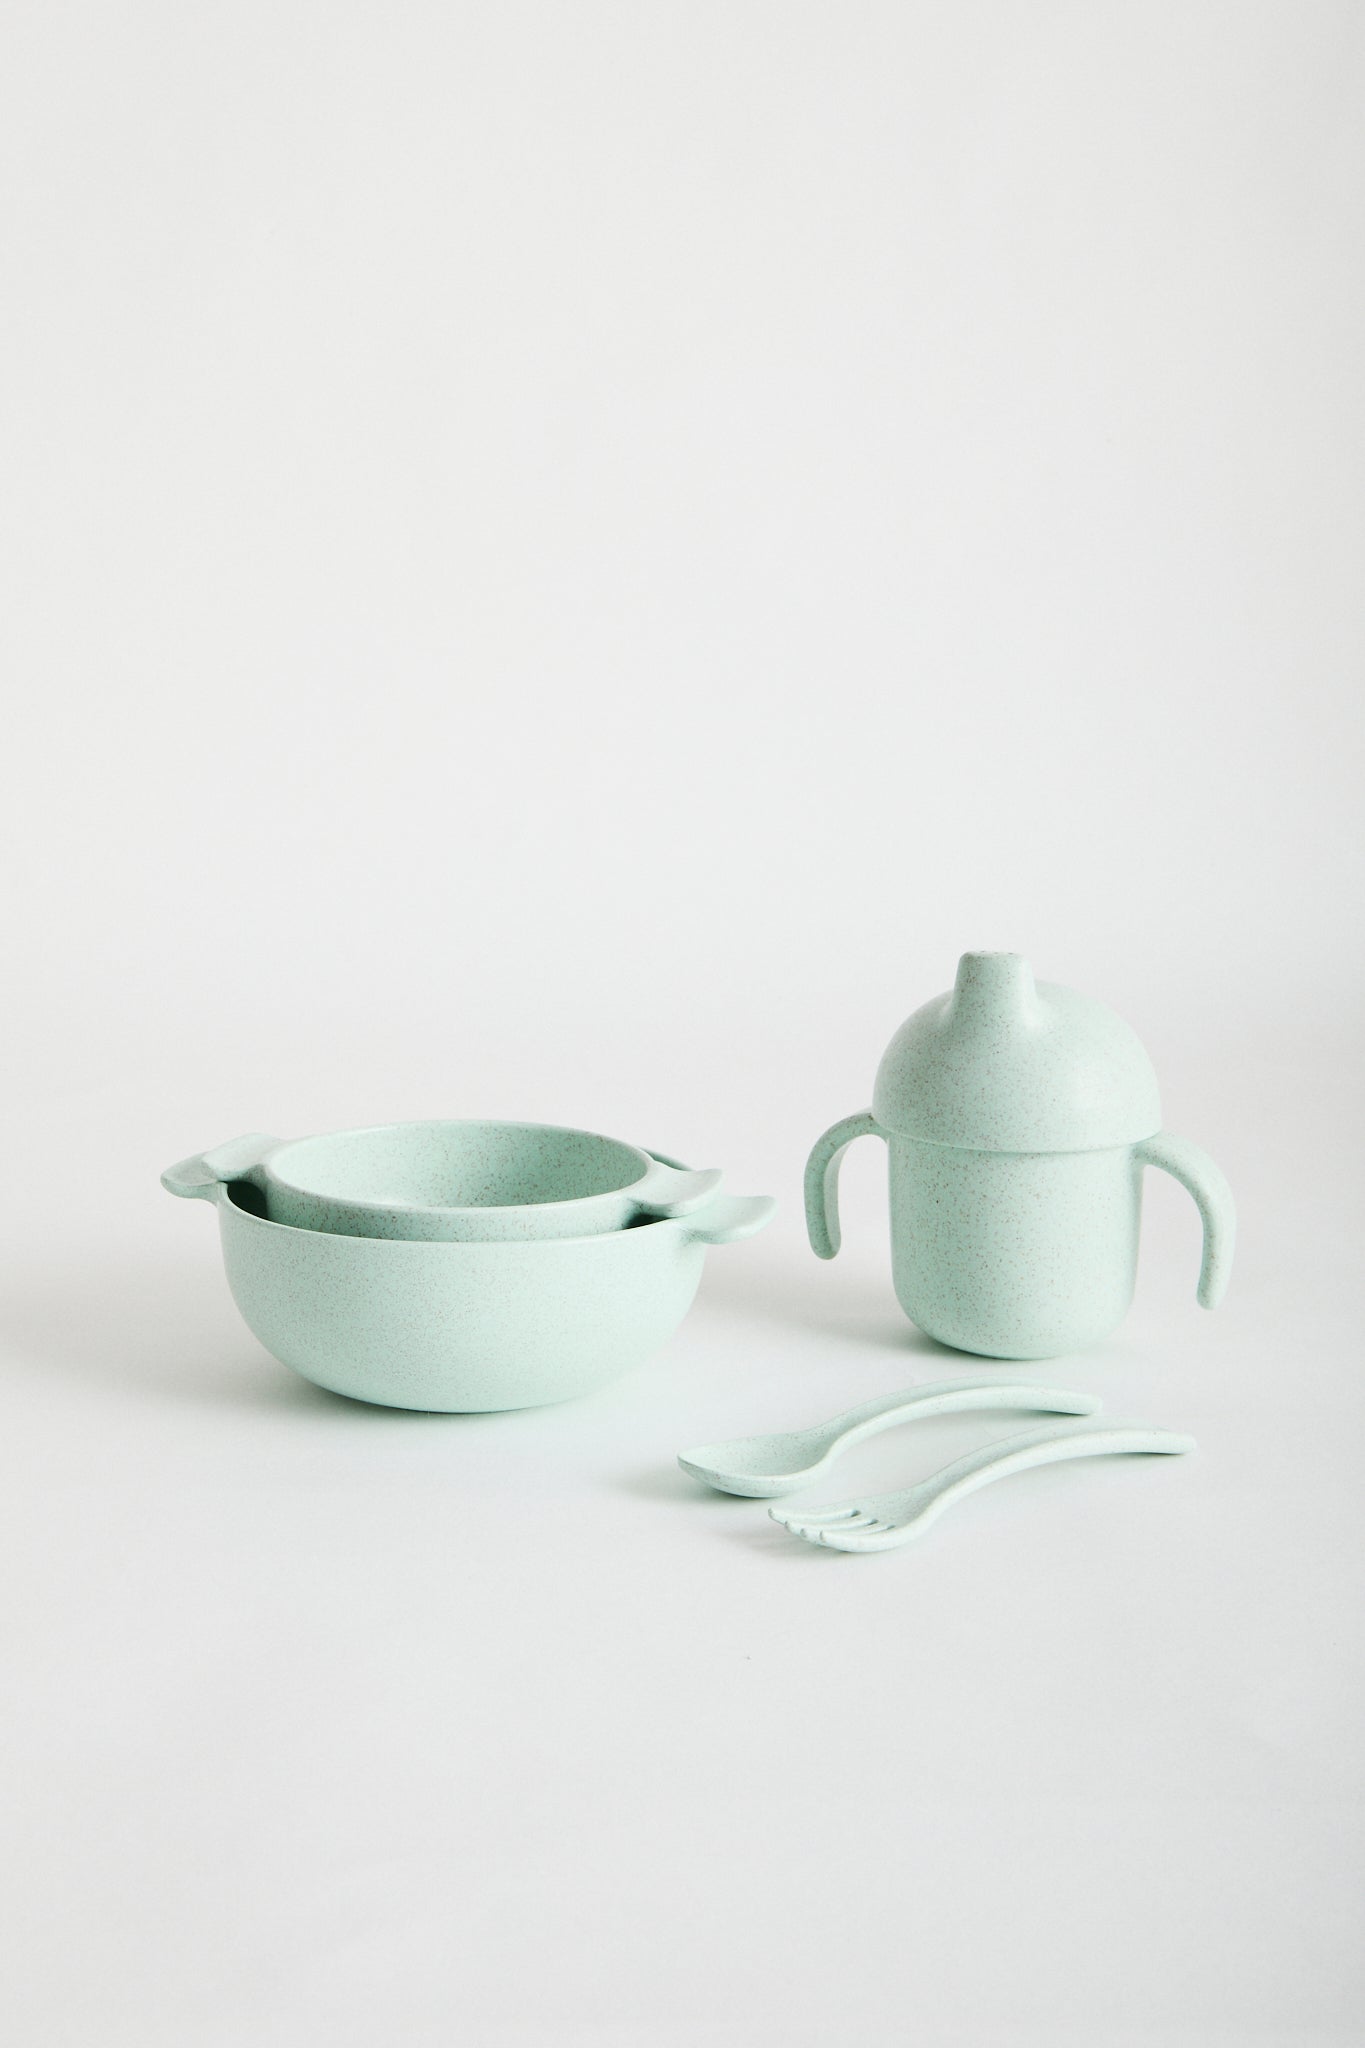 Wheat straw dinnerware set in Mint, -Set contains: sippy cup, large bowl, small bowl, spoon & fork